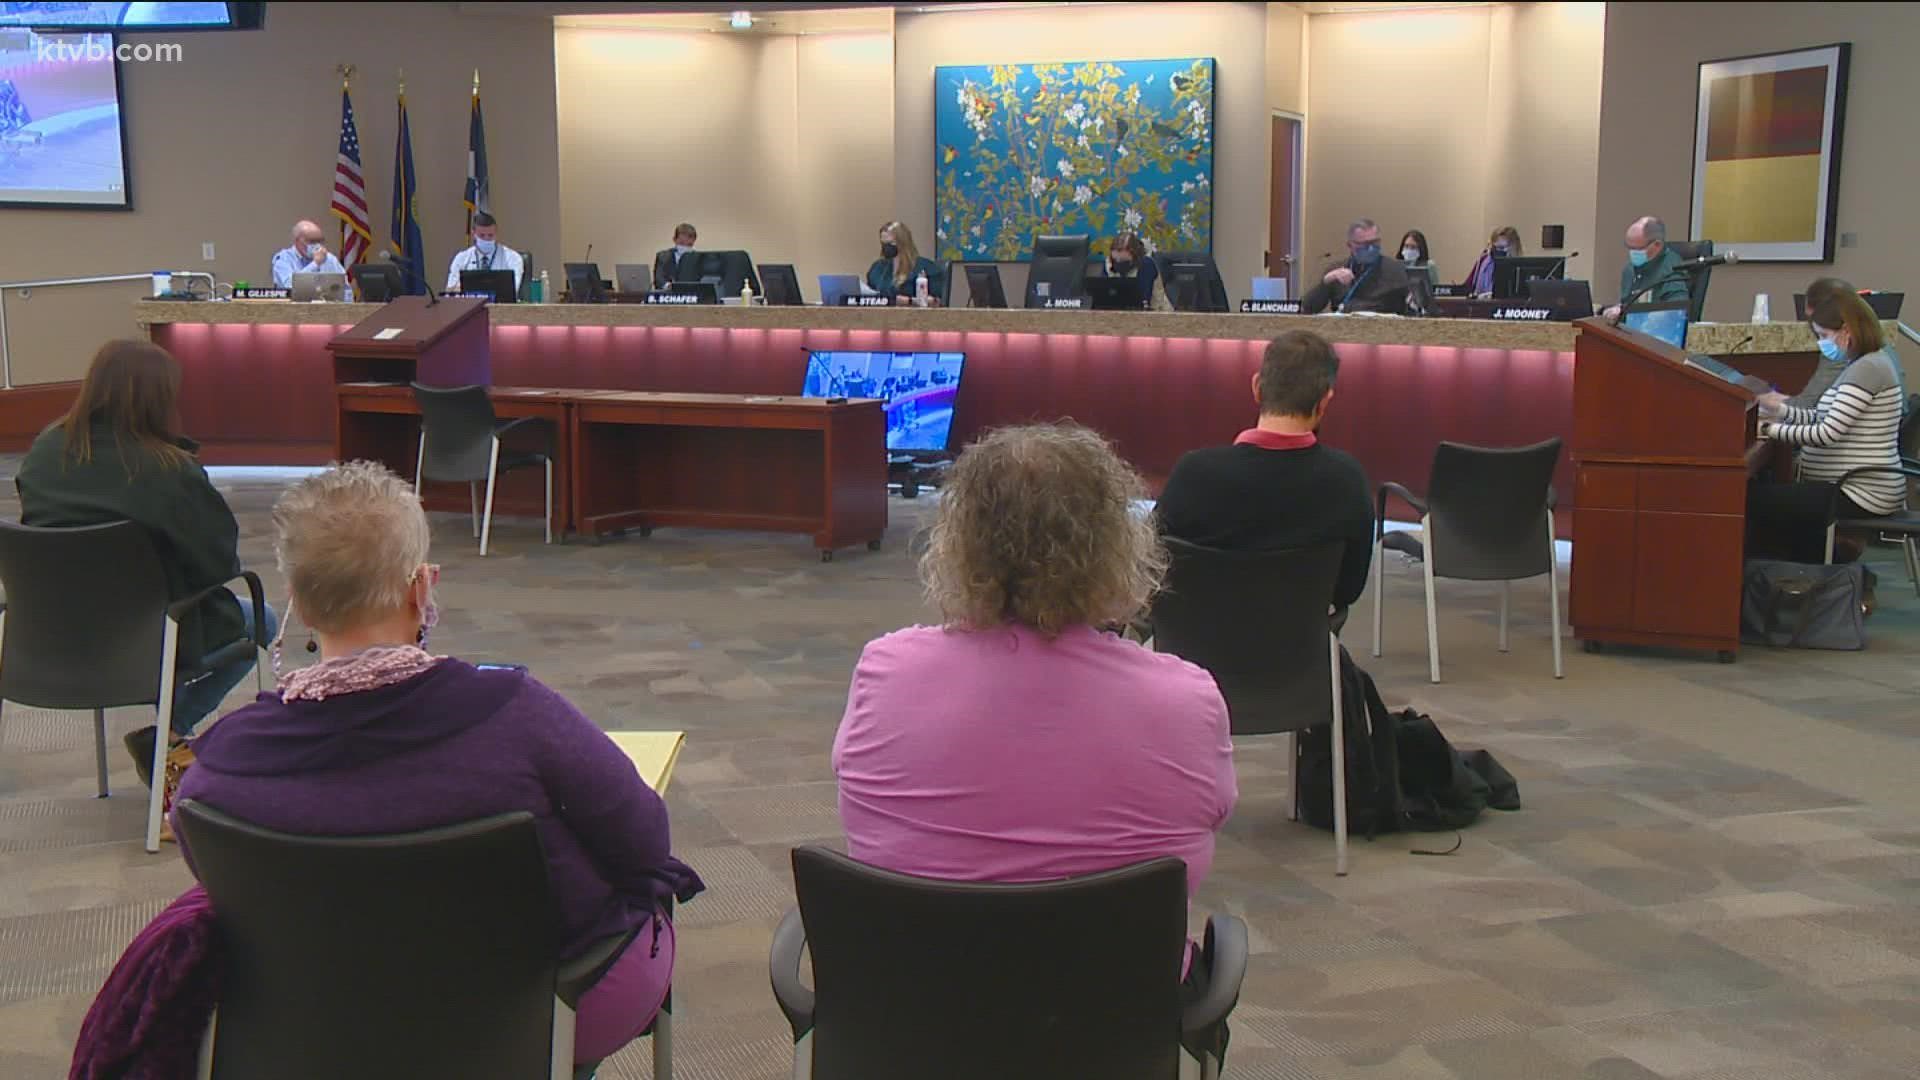 A year after Interfaith sanctuary's initial proposed move, Boise P&Z voted to reject Interfaith's conditional-use permit for a shelter on State Street.